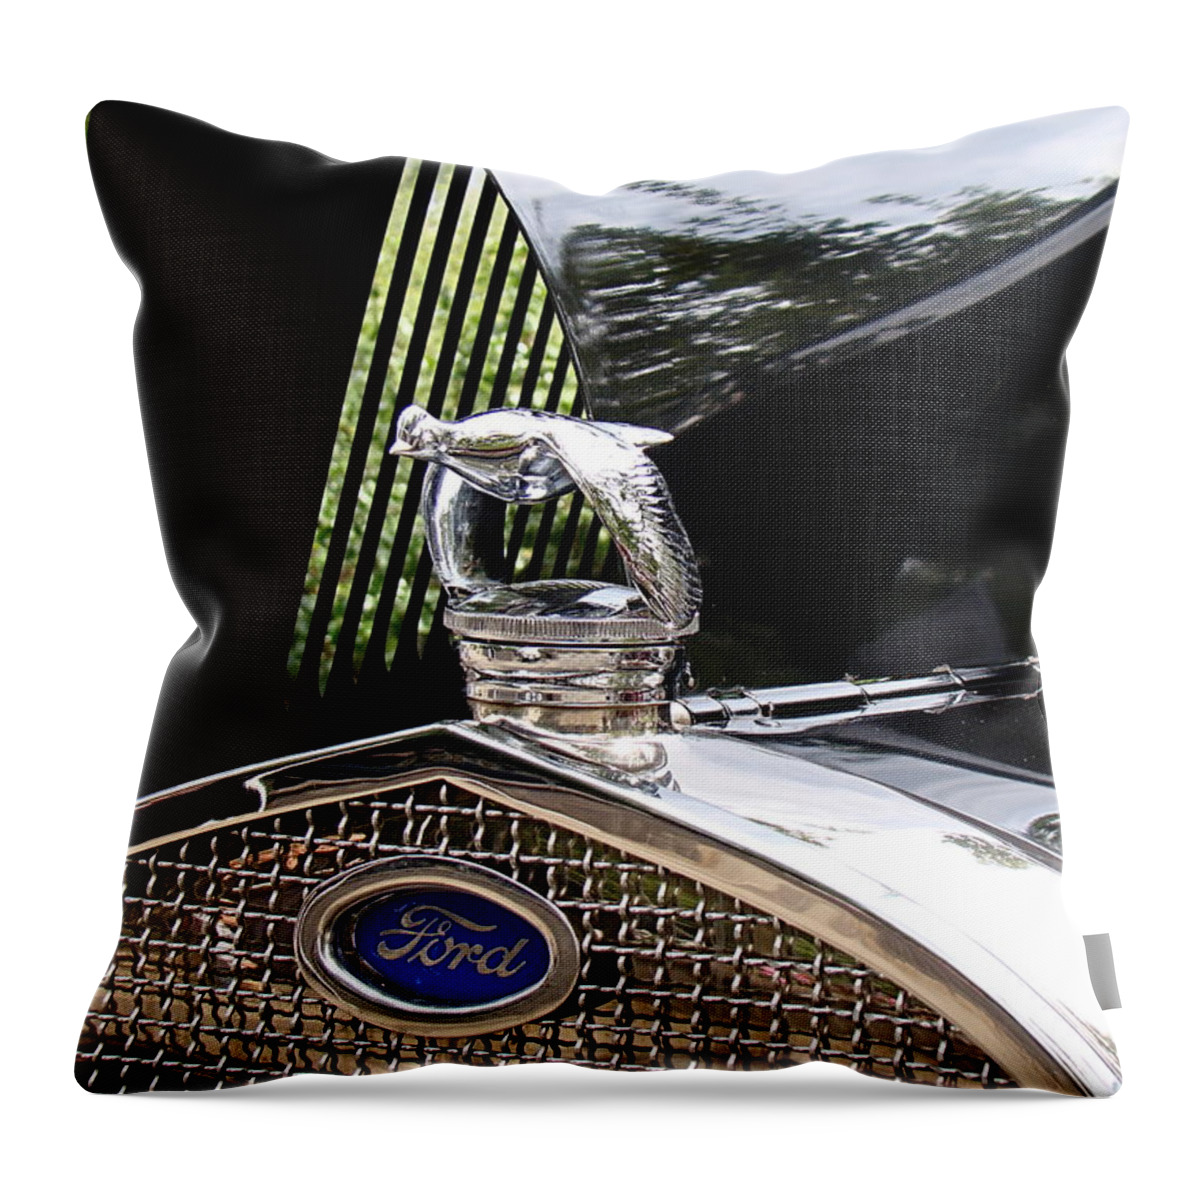 Ford Throw Pillow featuring the photograph Quail Radiator Cap- Ford by Nick Kloepping